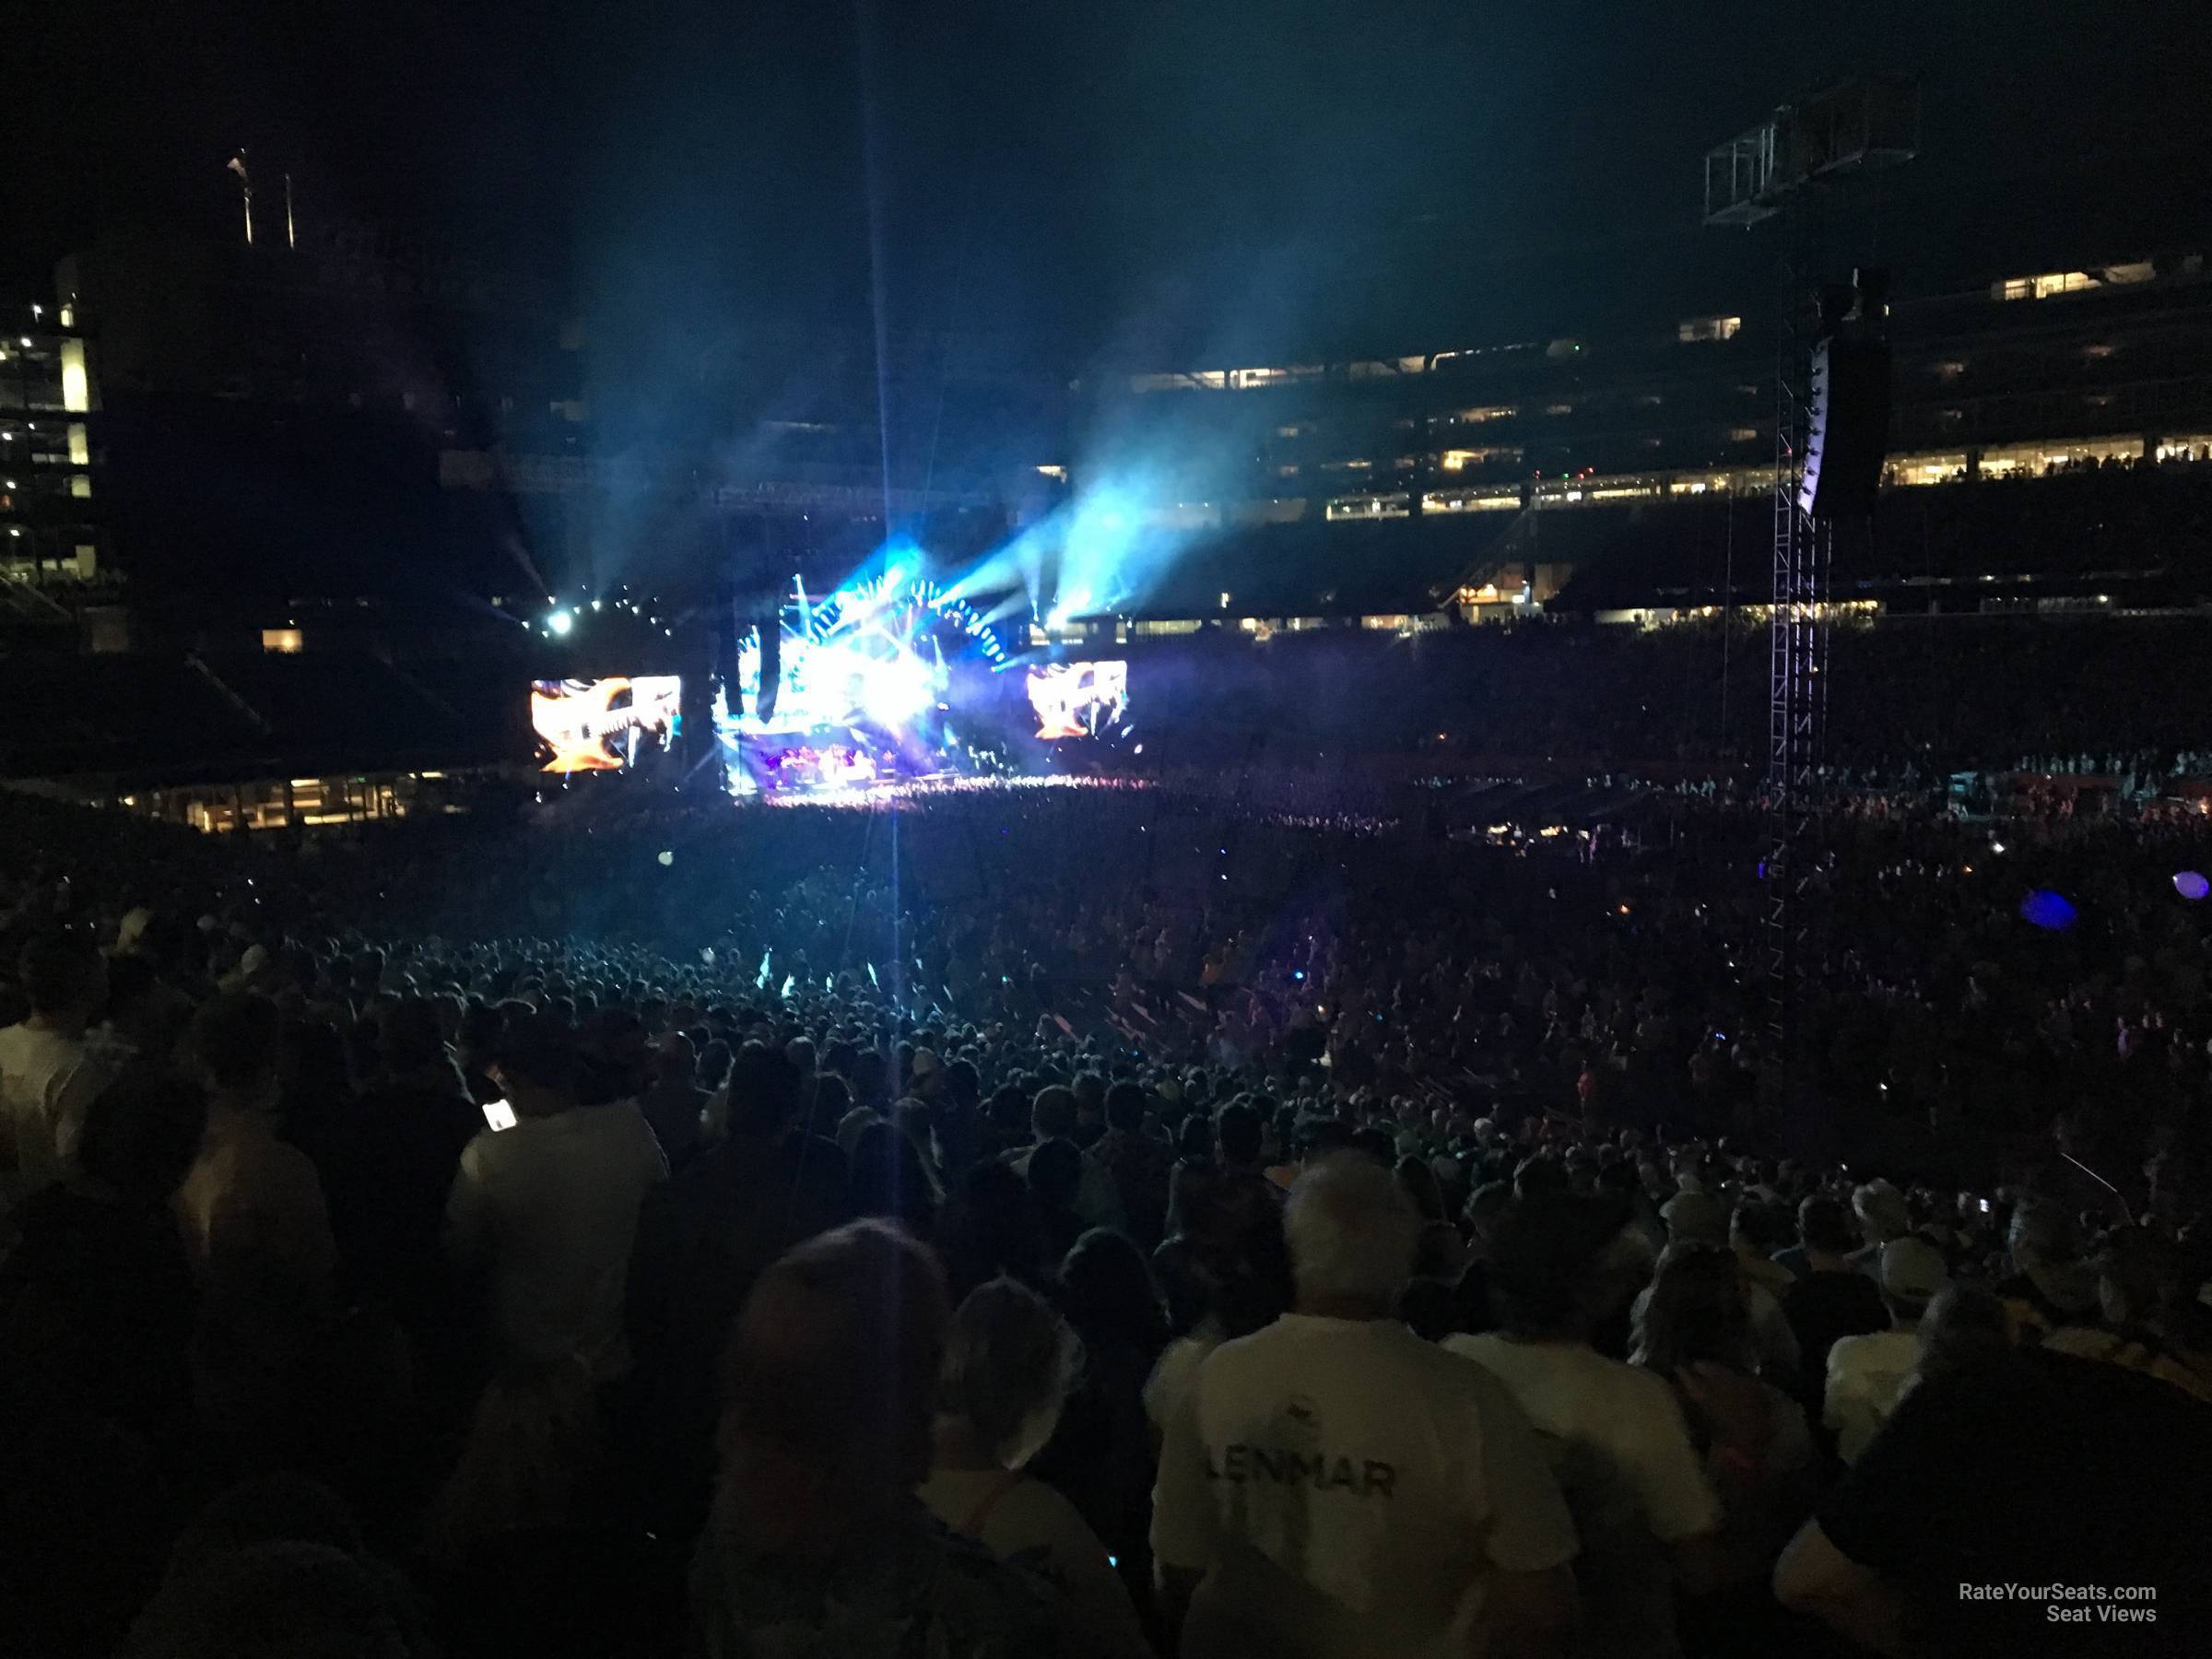 section 106, row 38 seat view  for concert - gillette stadium